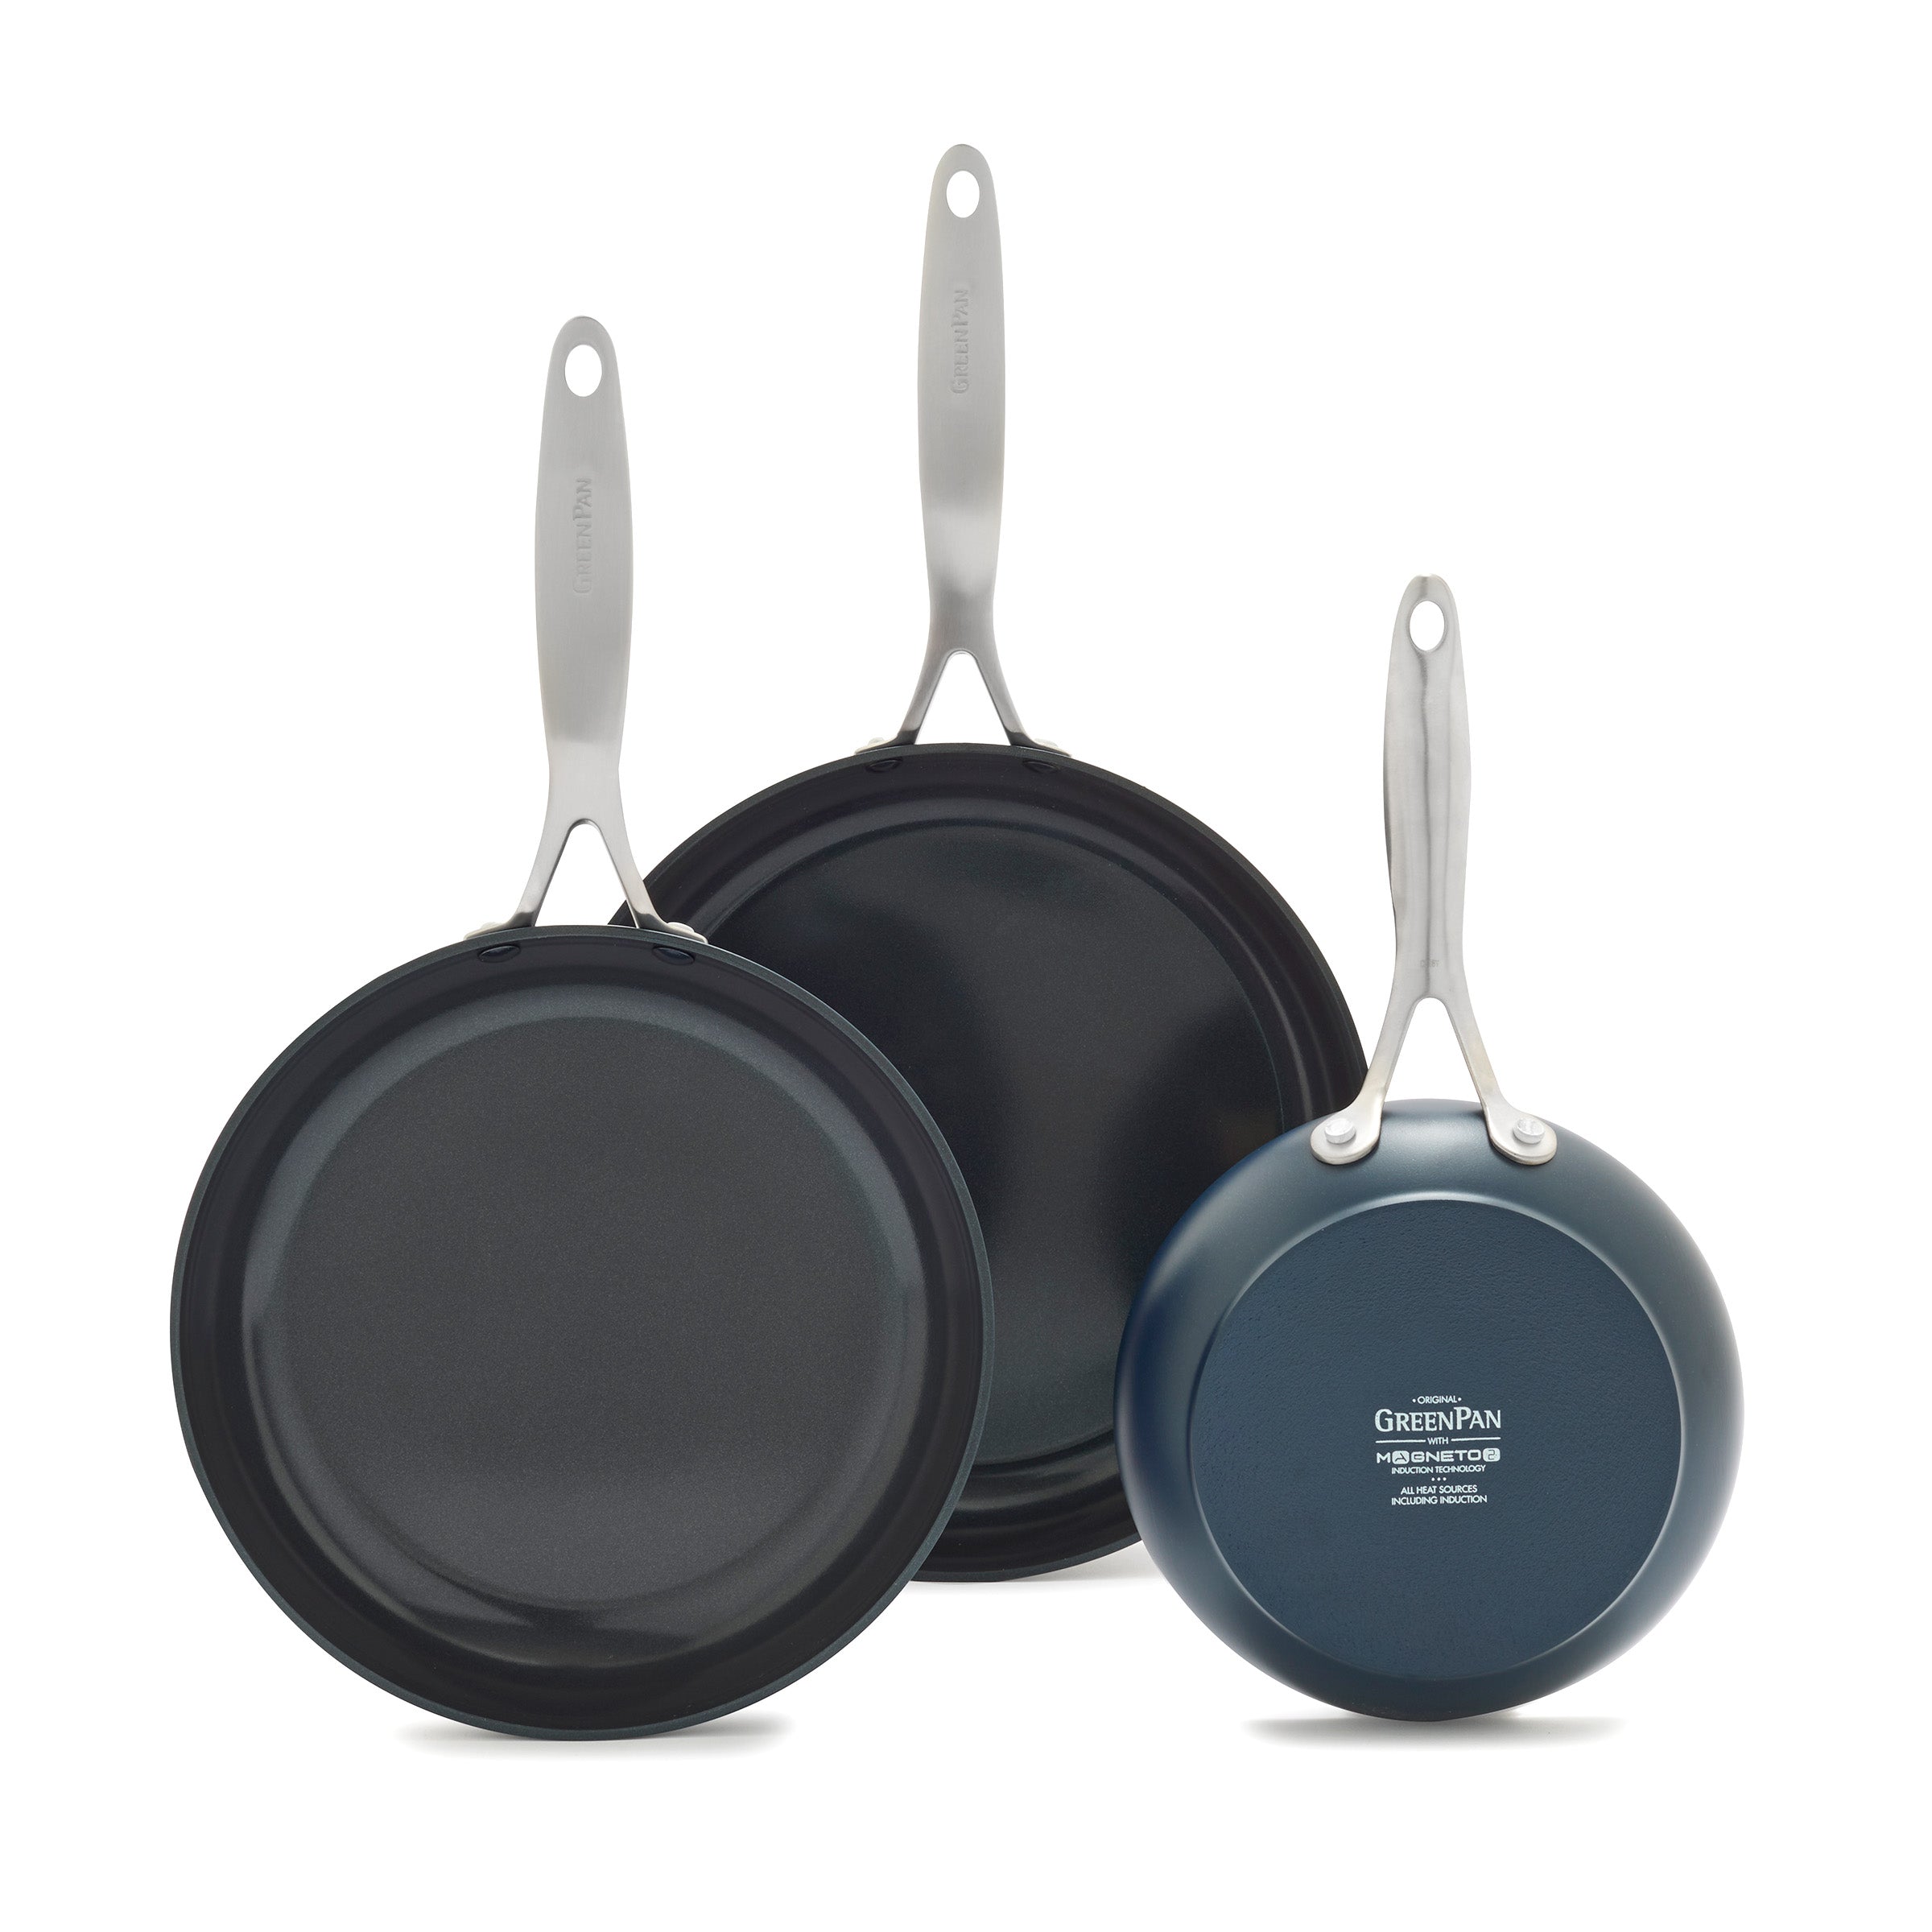 Flamingpan 12 Piece Nonstick Pots and Pans Sets,Kitchen Cookware with  Ceramic Coating,Dishwasher Safe,Frying Pan Set with Lid, Induction Pots and  Pans